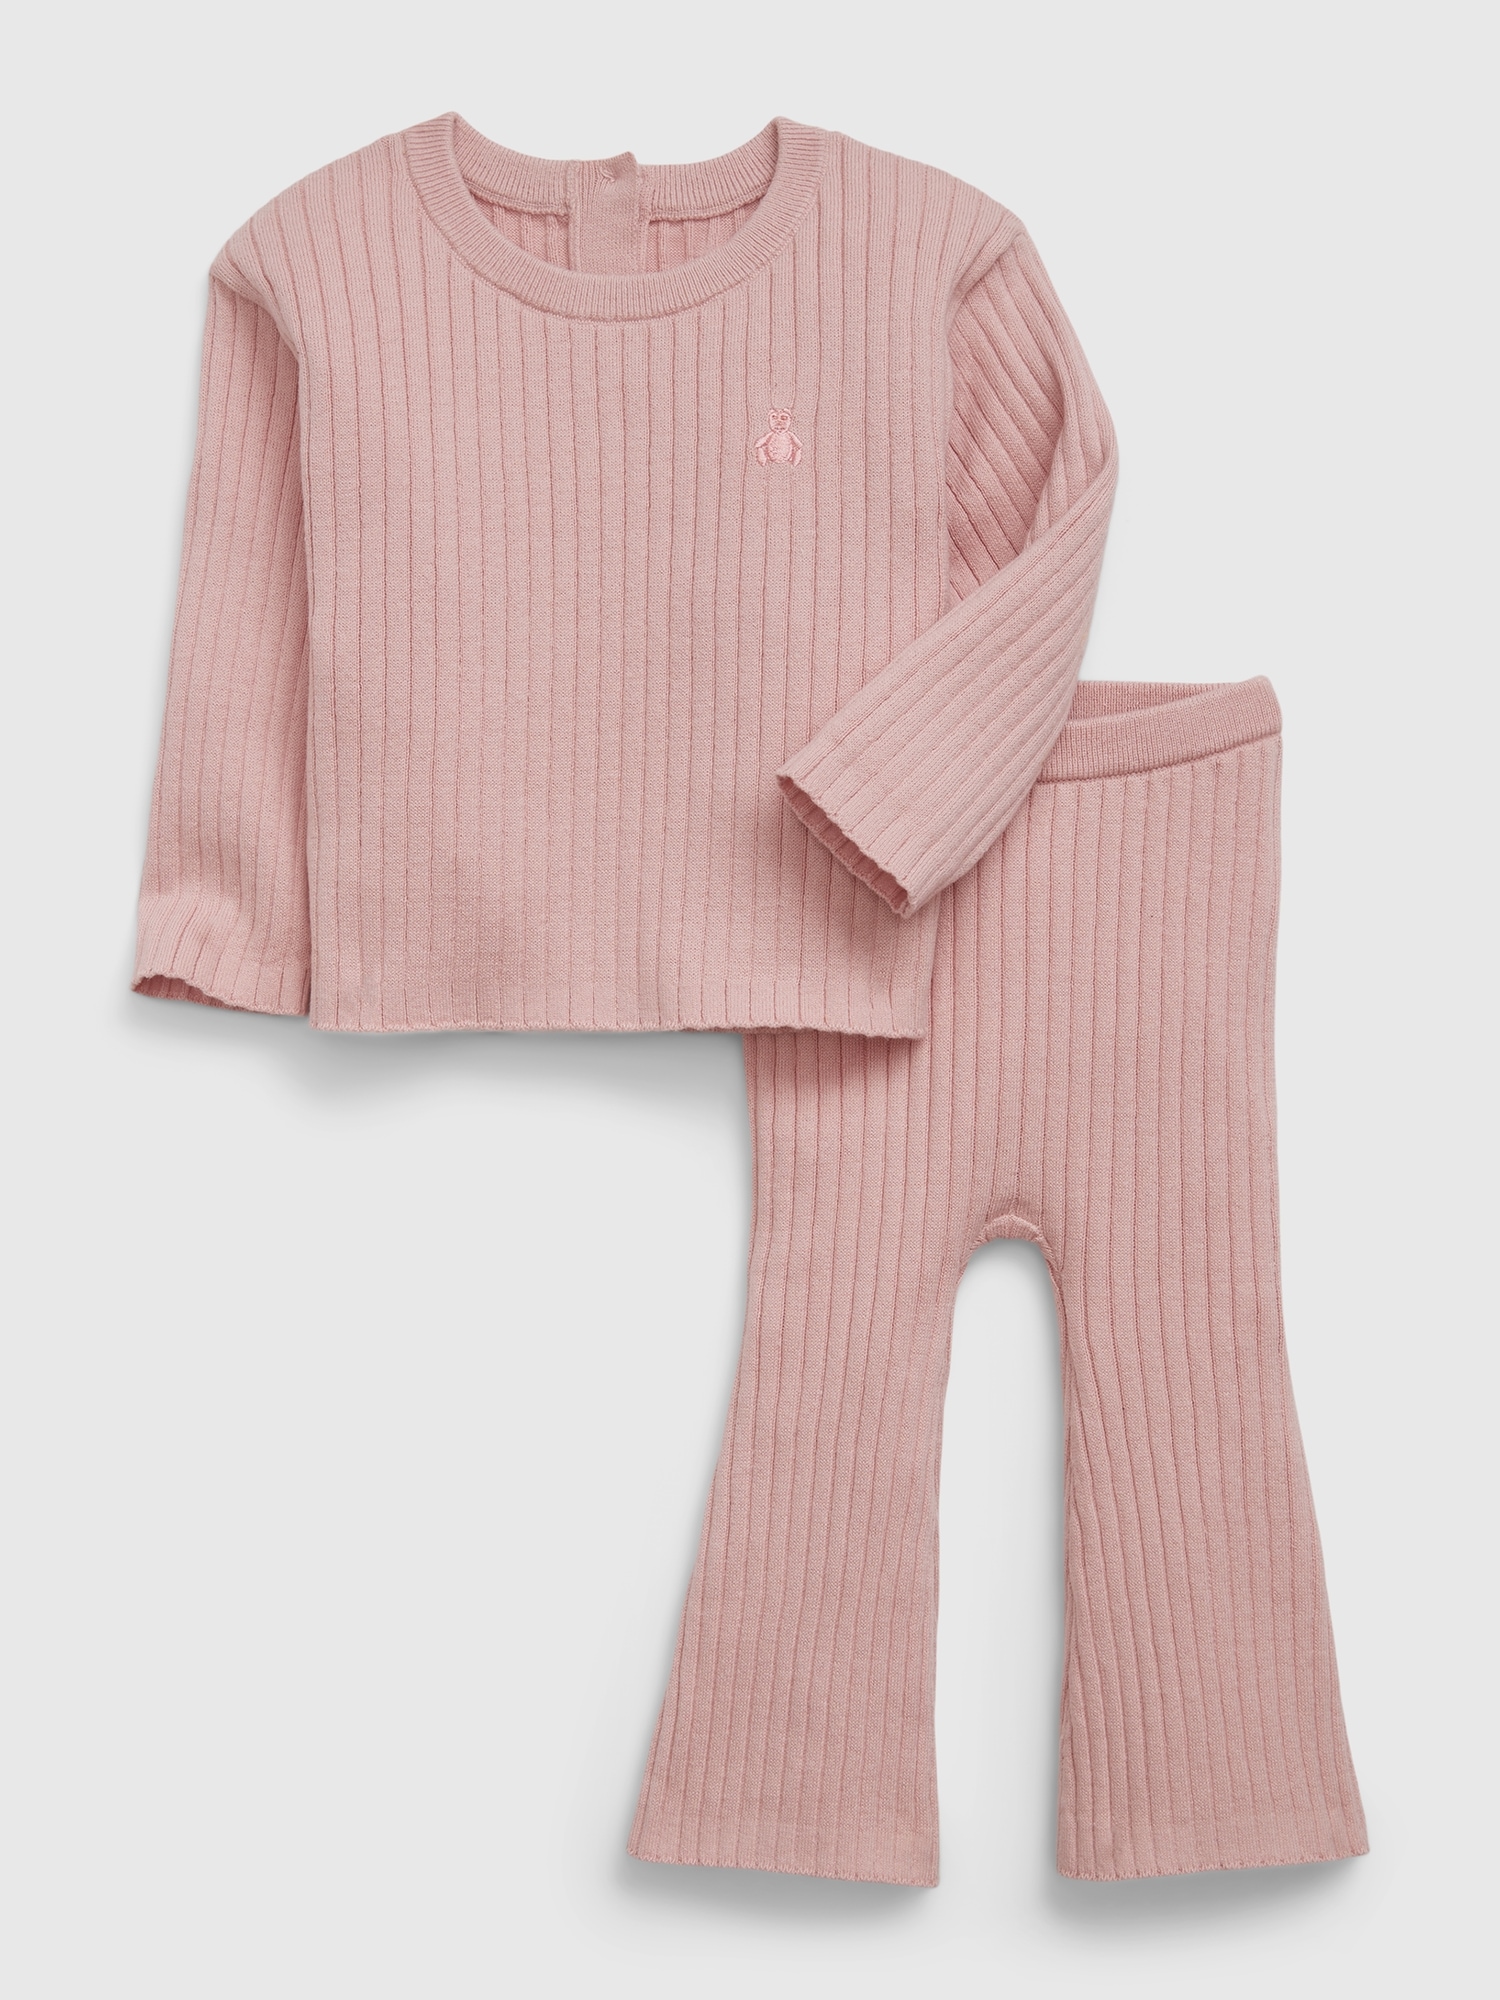 Gap Baby Rib Sweater Outfit Set